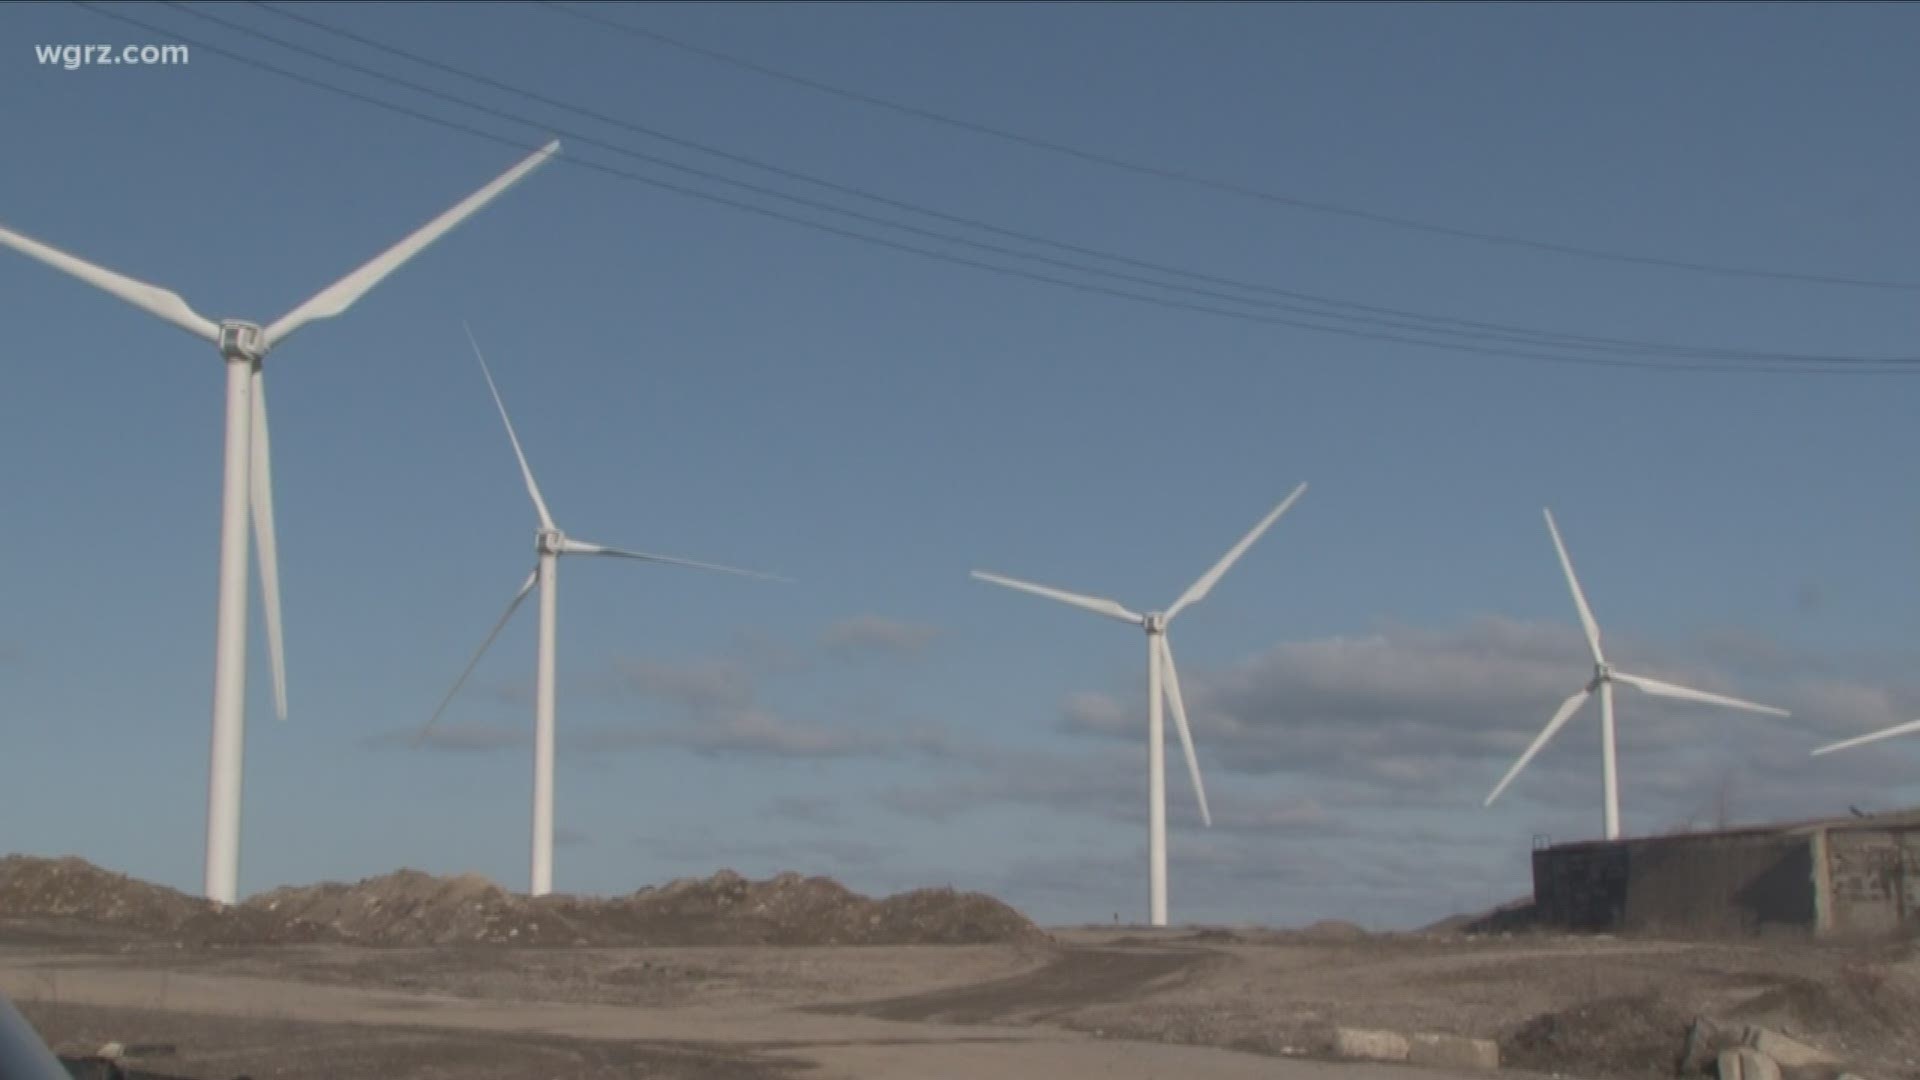 Congressman says border patrol is concerned large windmills could impact the radar they use to help secure the border.